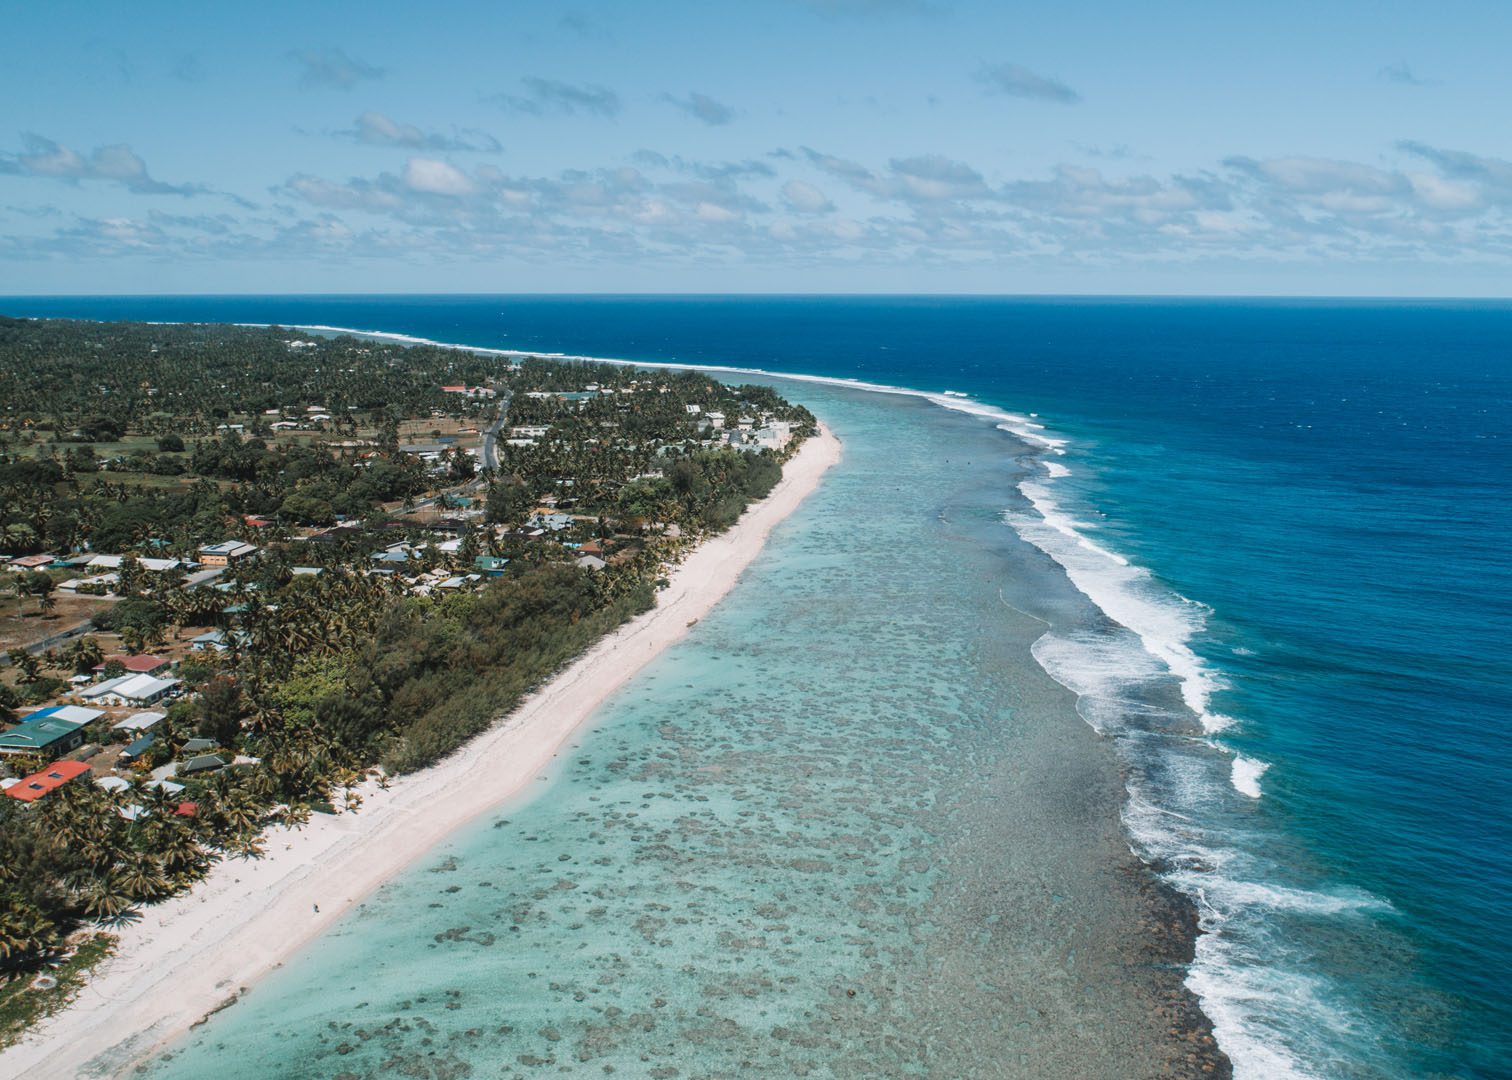 An aerial partial image of Rarotonga Island showing off the splashing of waves on the reef and the various blue shades of the Rarotonga waters